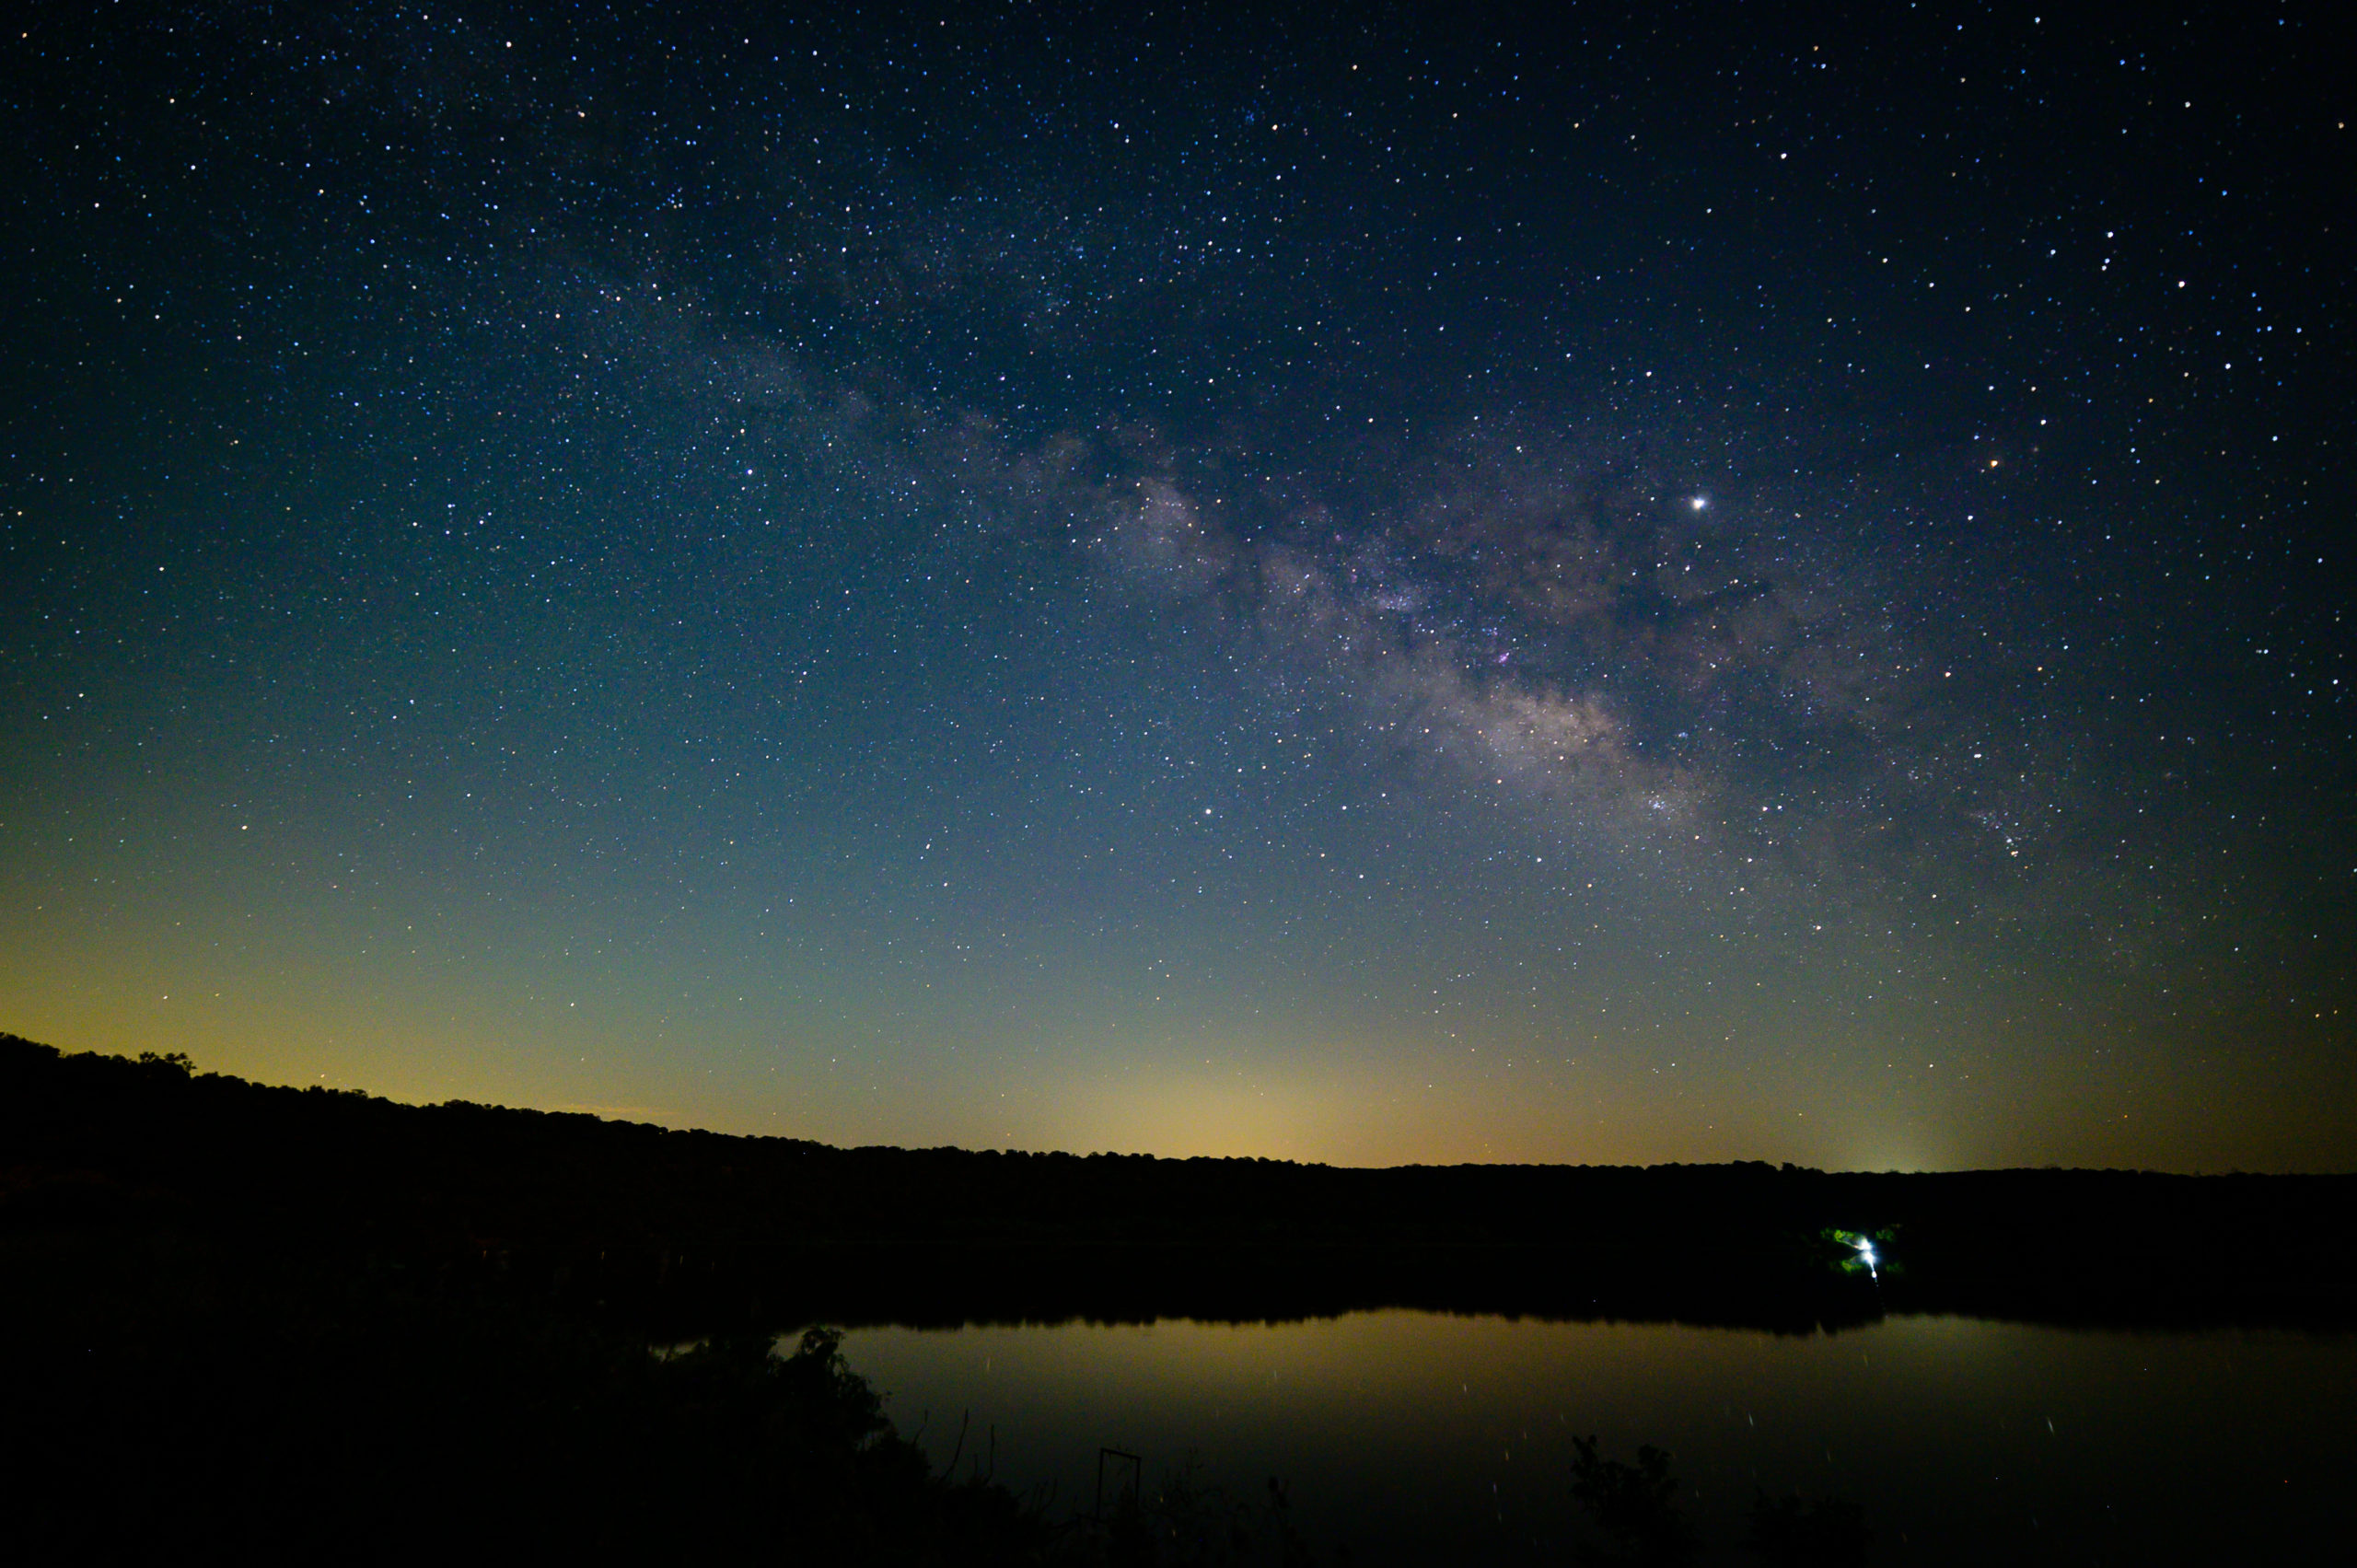 The Milky Way spans over a lake.